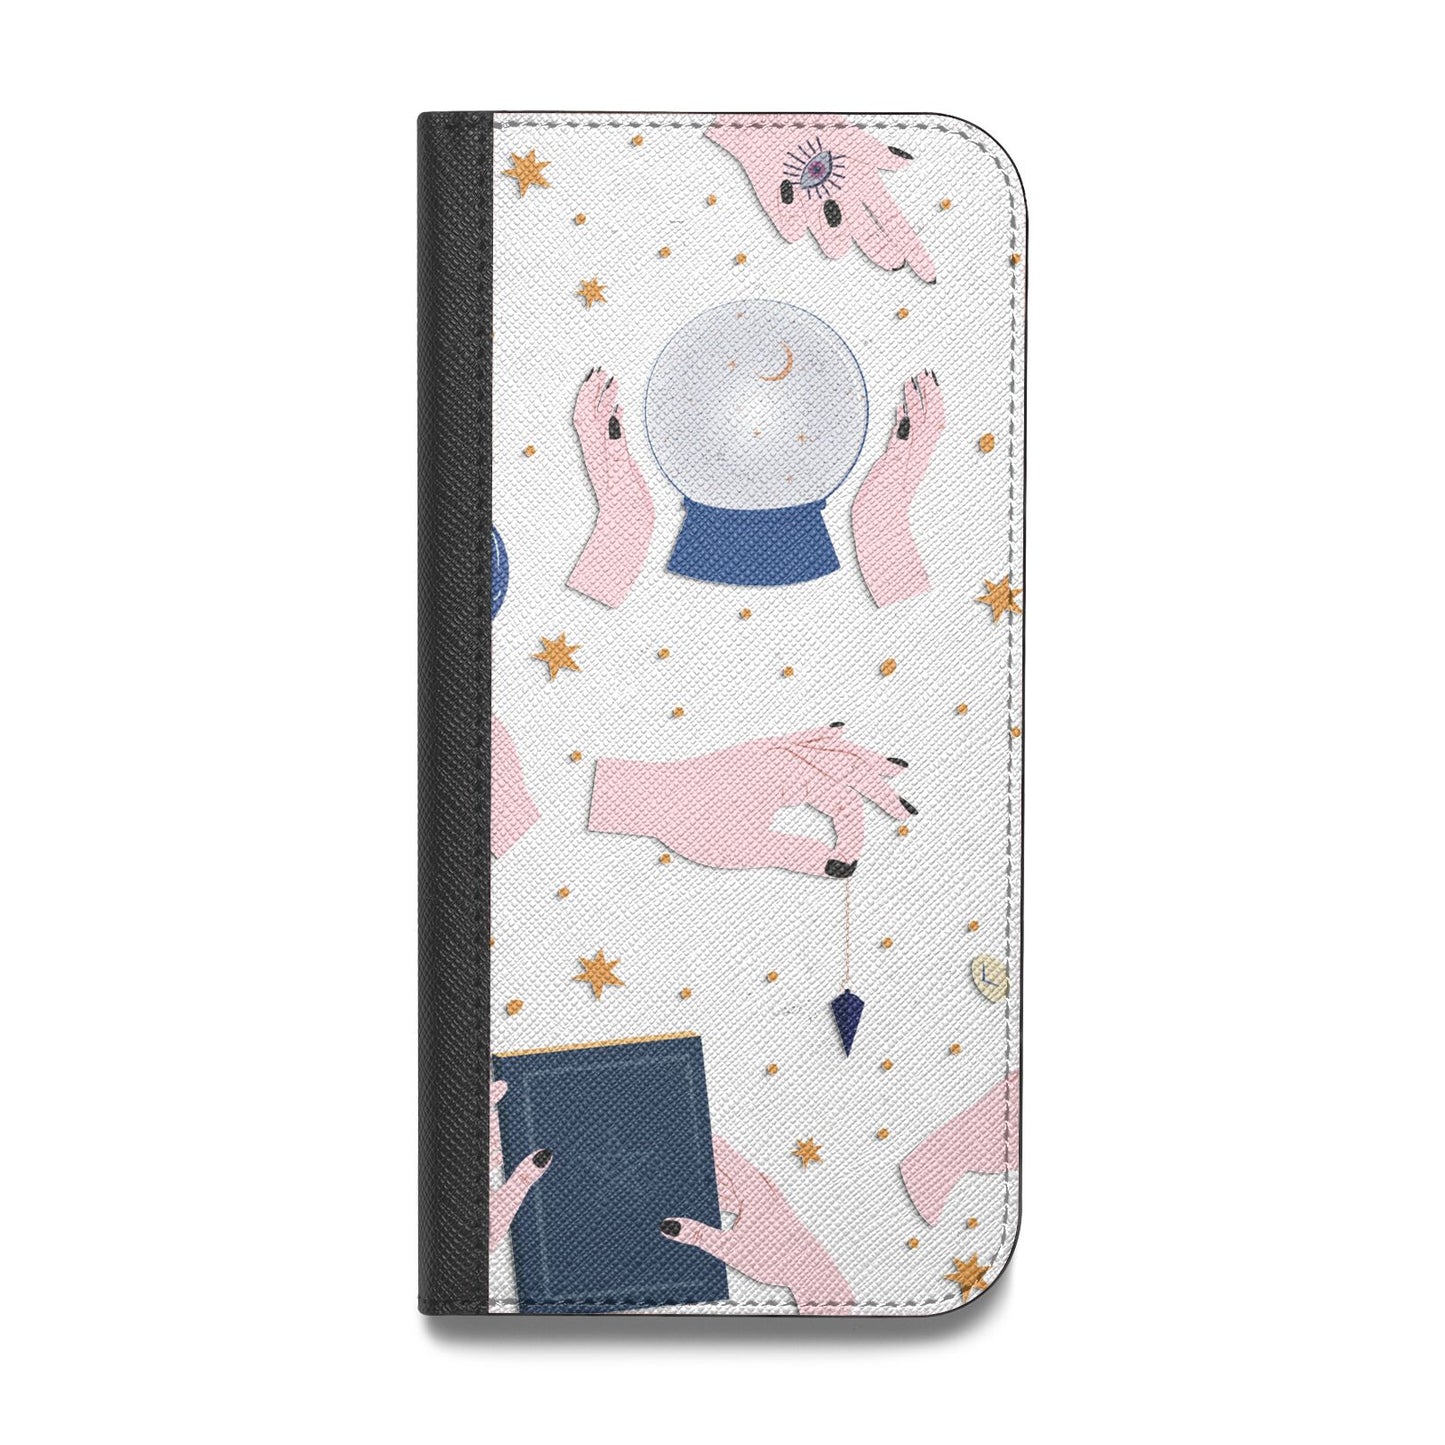 Clairvoyant Witches Hands Vegan Leather Flip iPhone Case